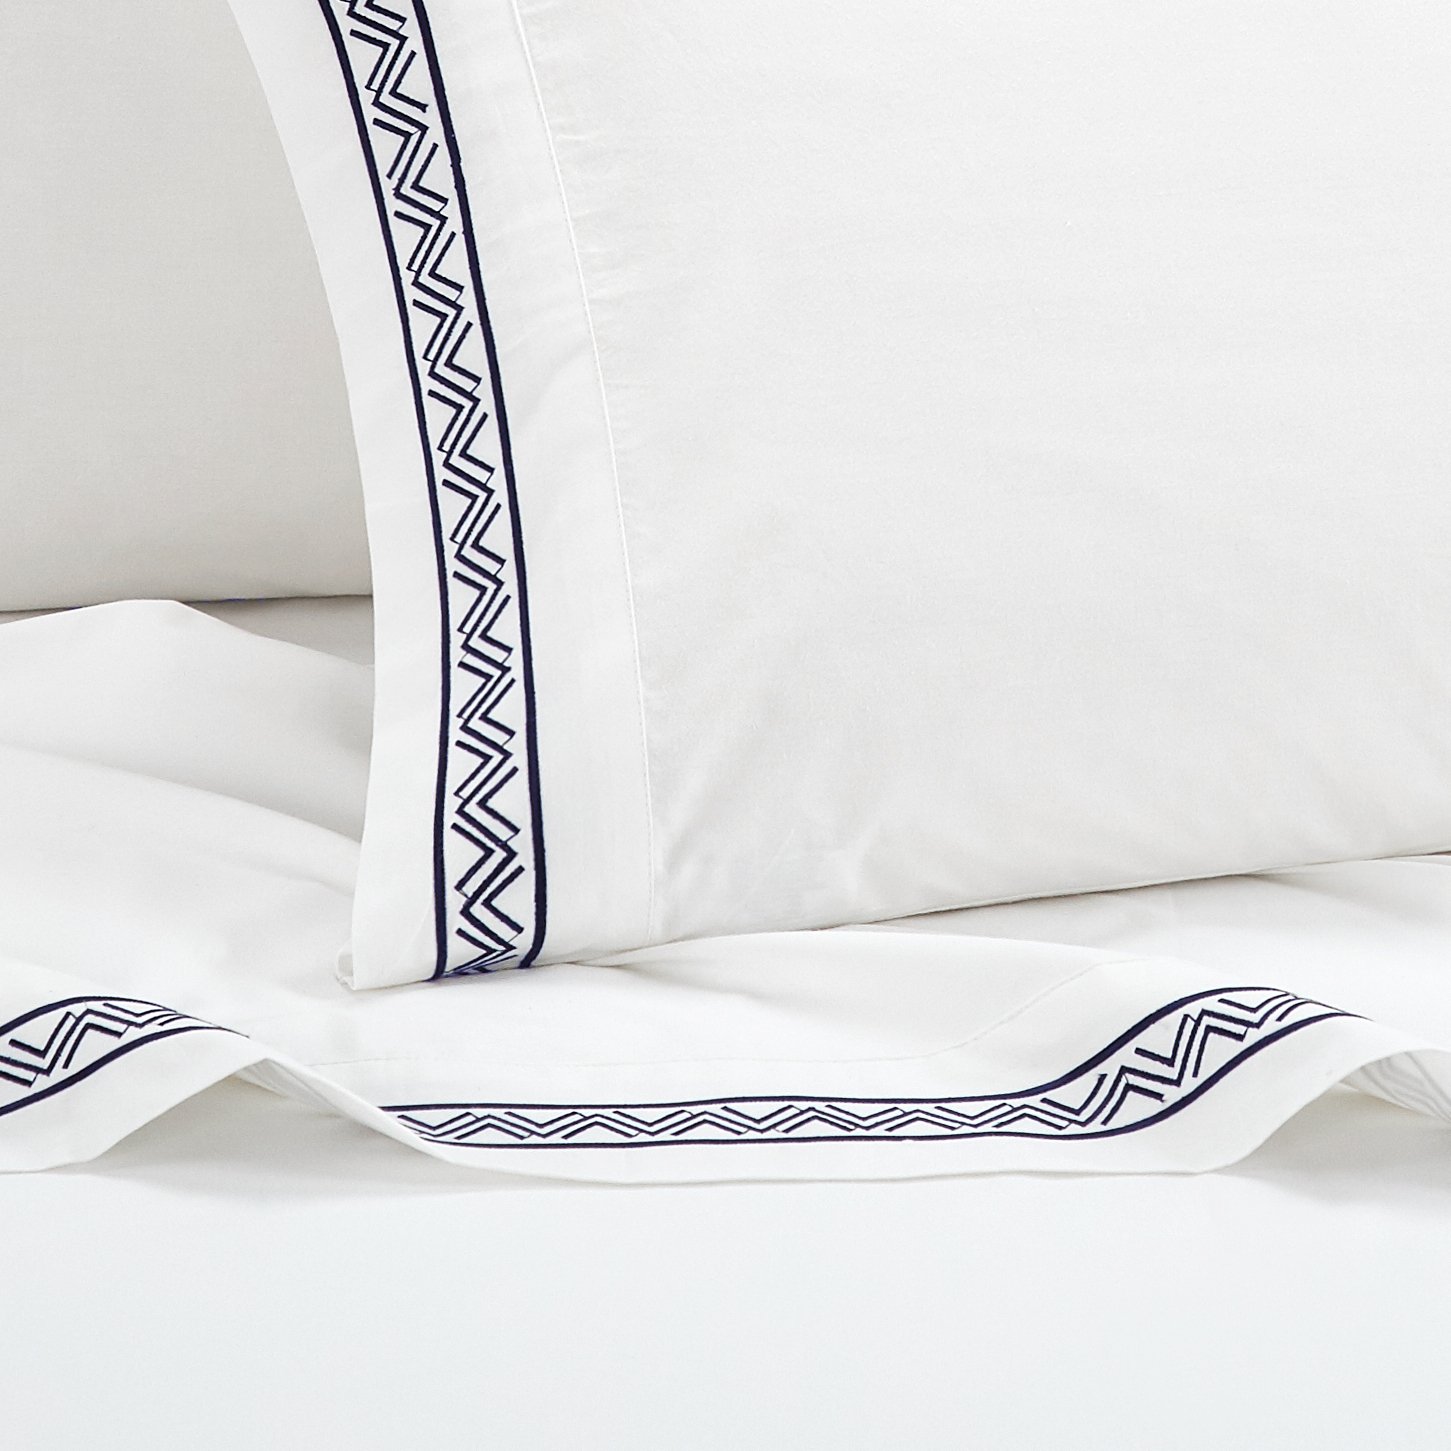 Chic Home 4 Piece Orden Organic Cotton Sheet Set Solid White With Dual Stripe Embroidery